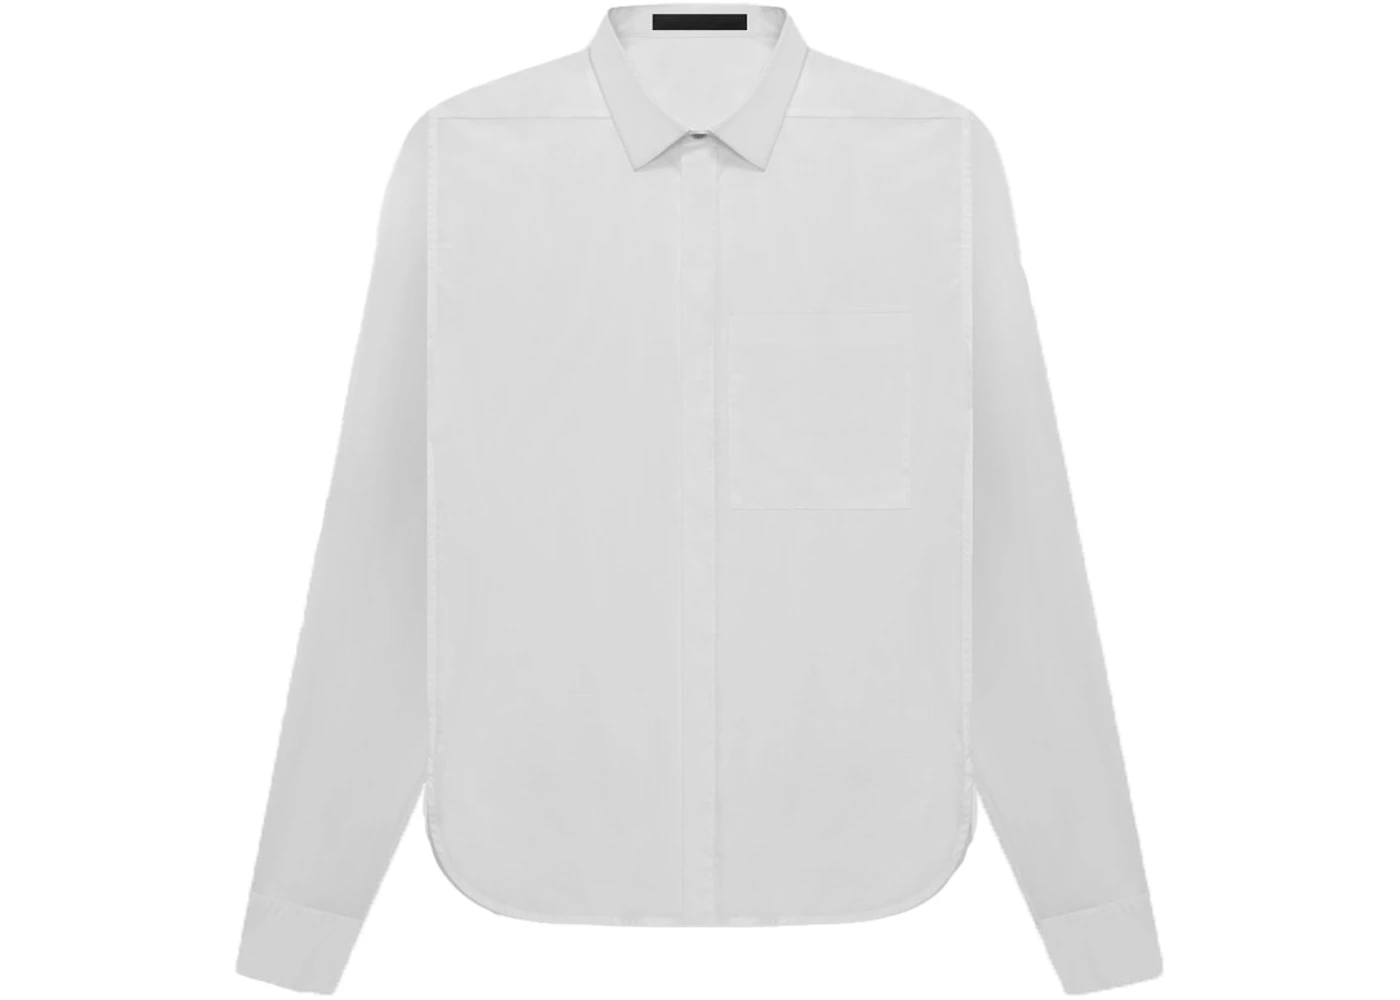 Fear of God Easy Collared Shirt White Men's - SEVENTH COLLECTION - US